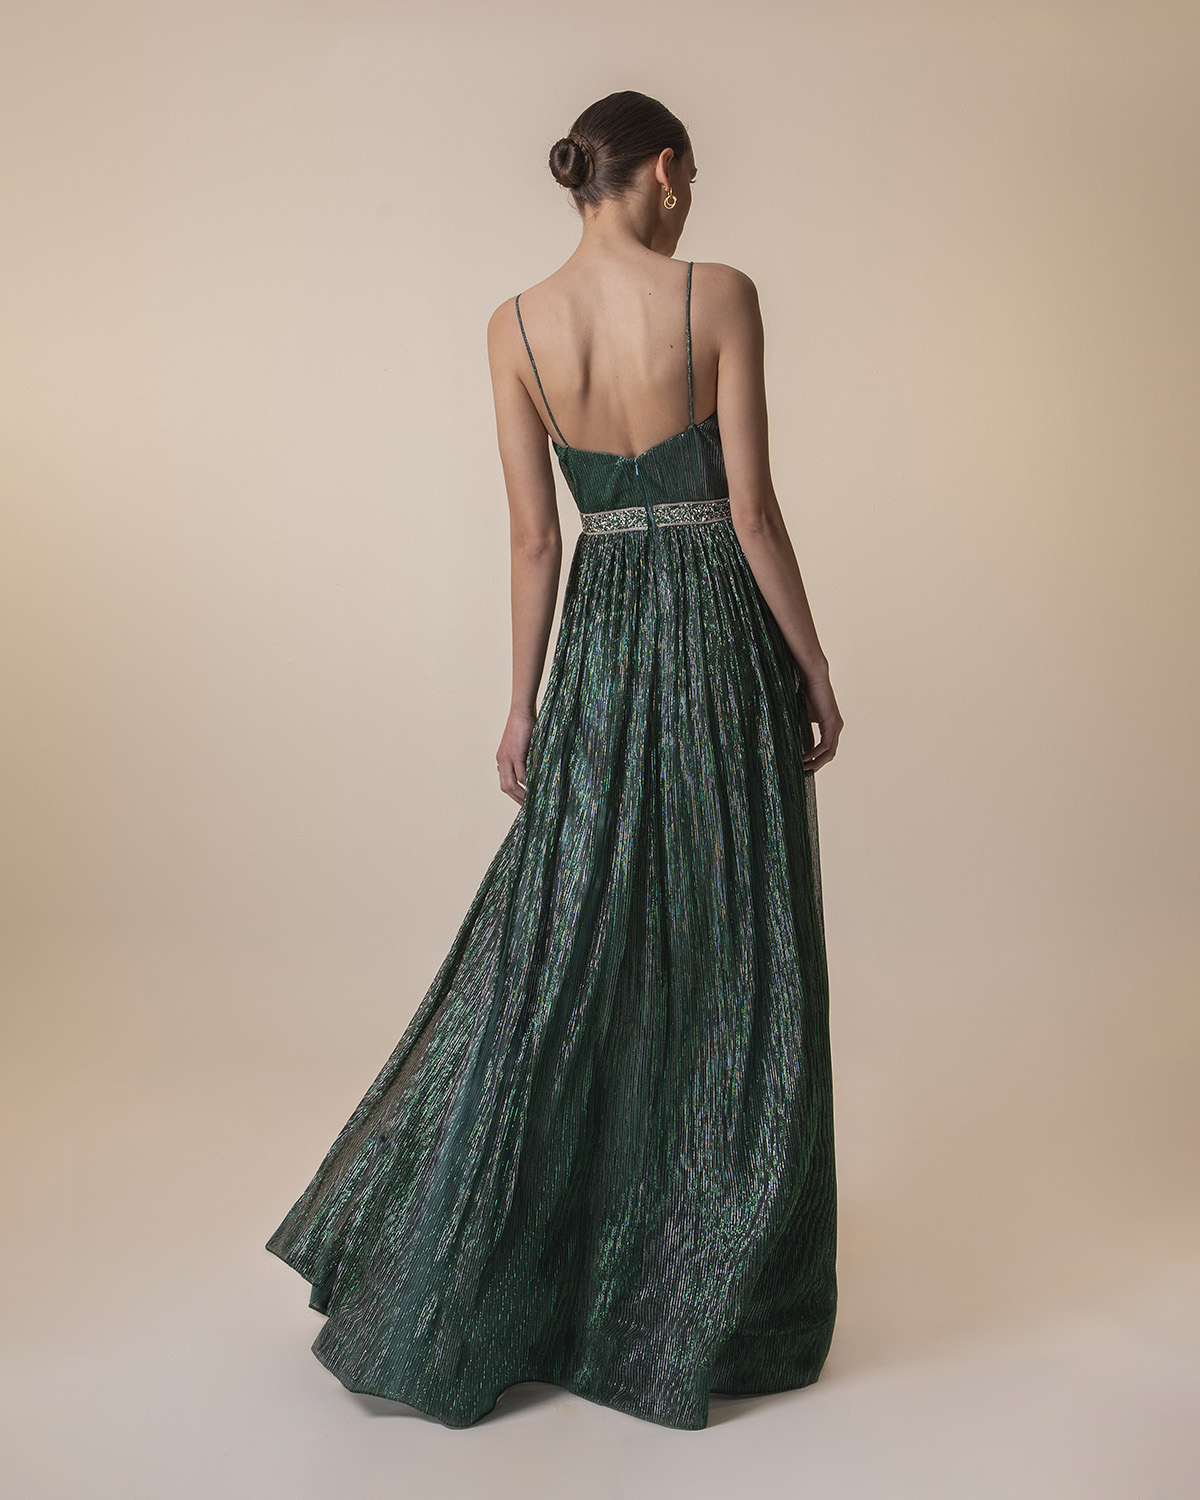 Long pleated evening dress with shining fabric and beading around the waist